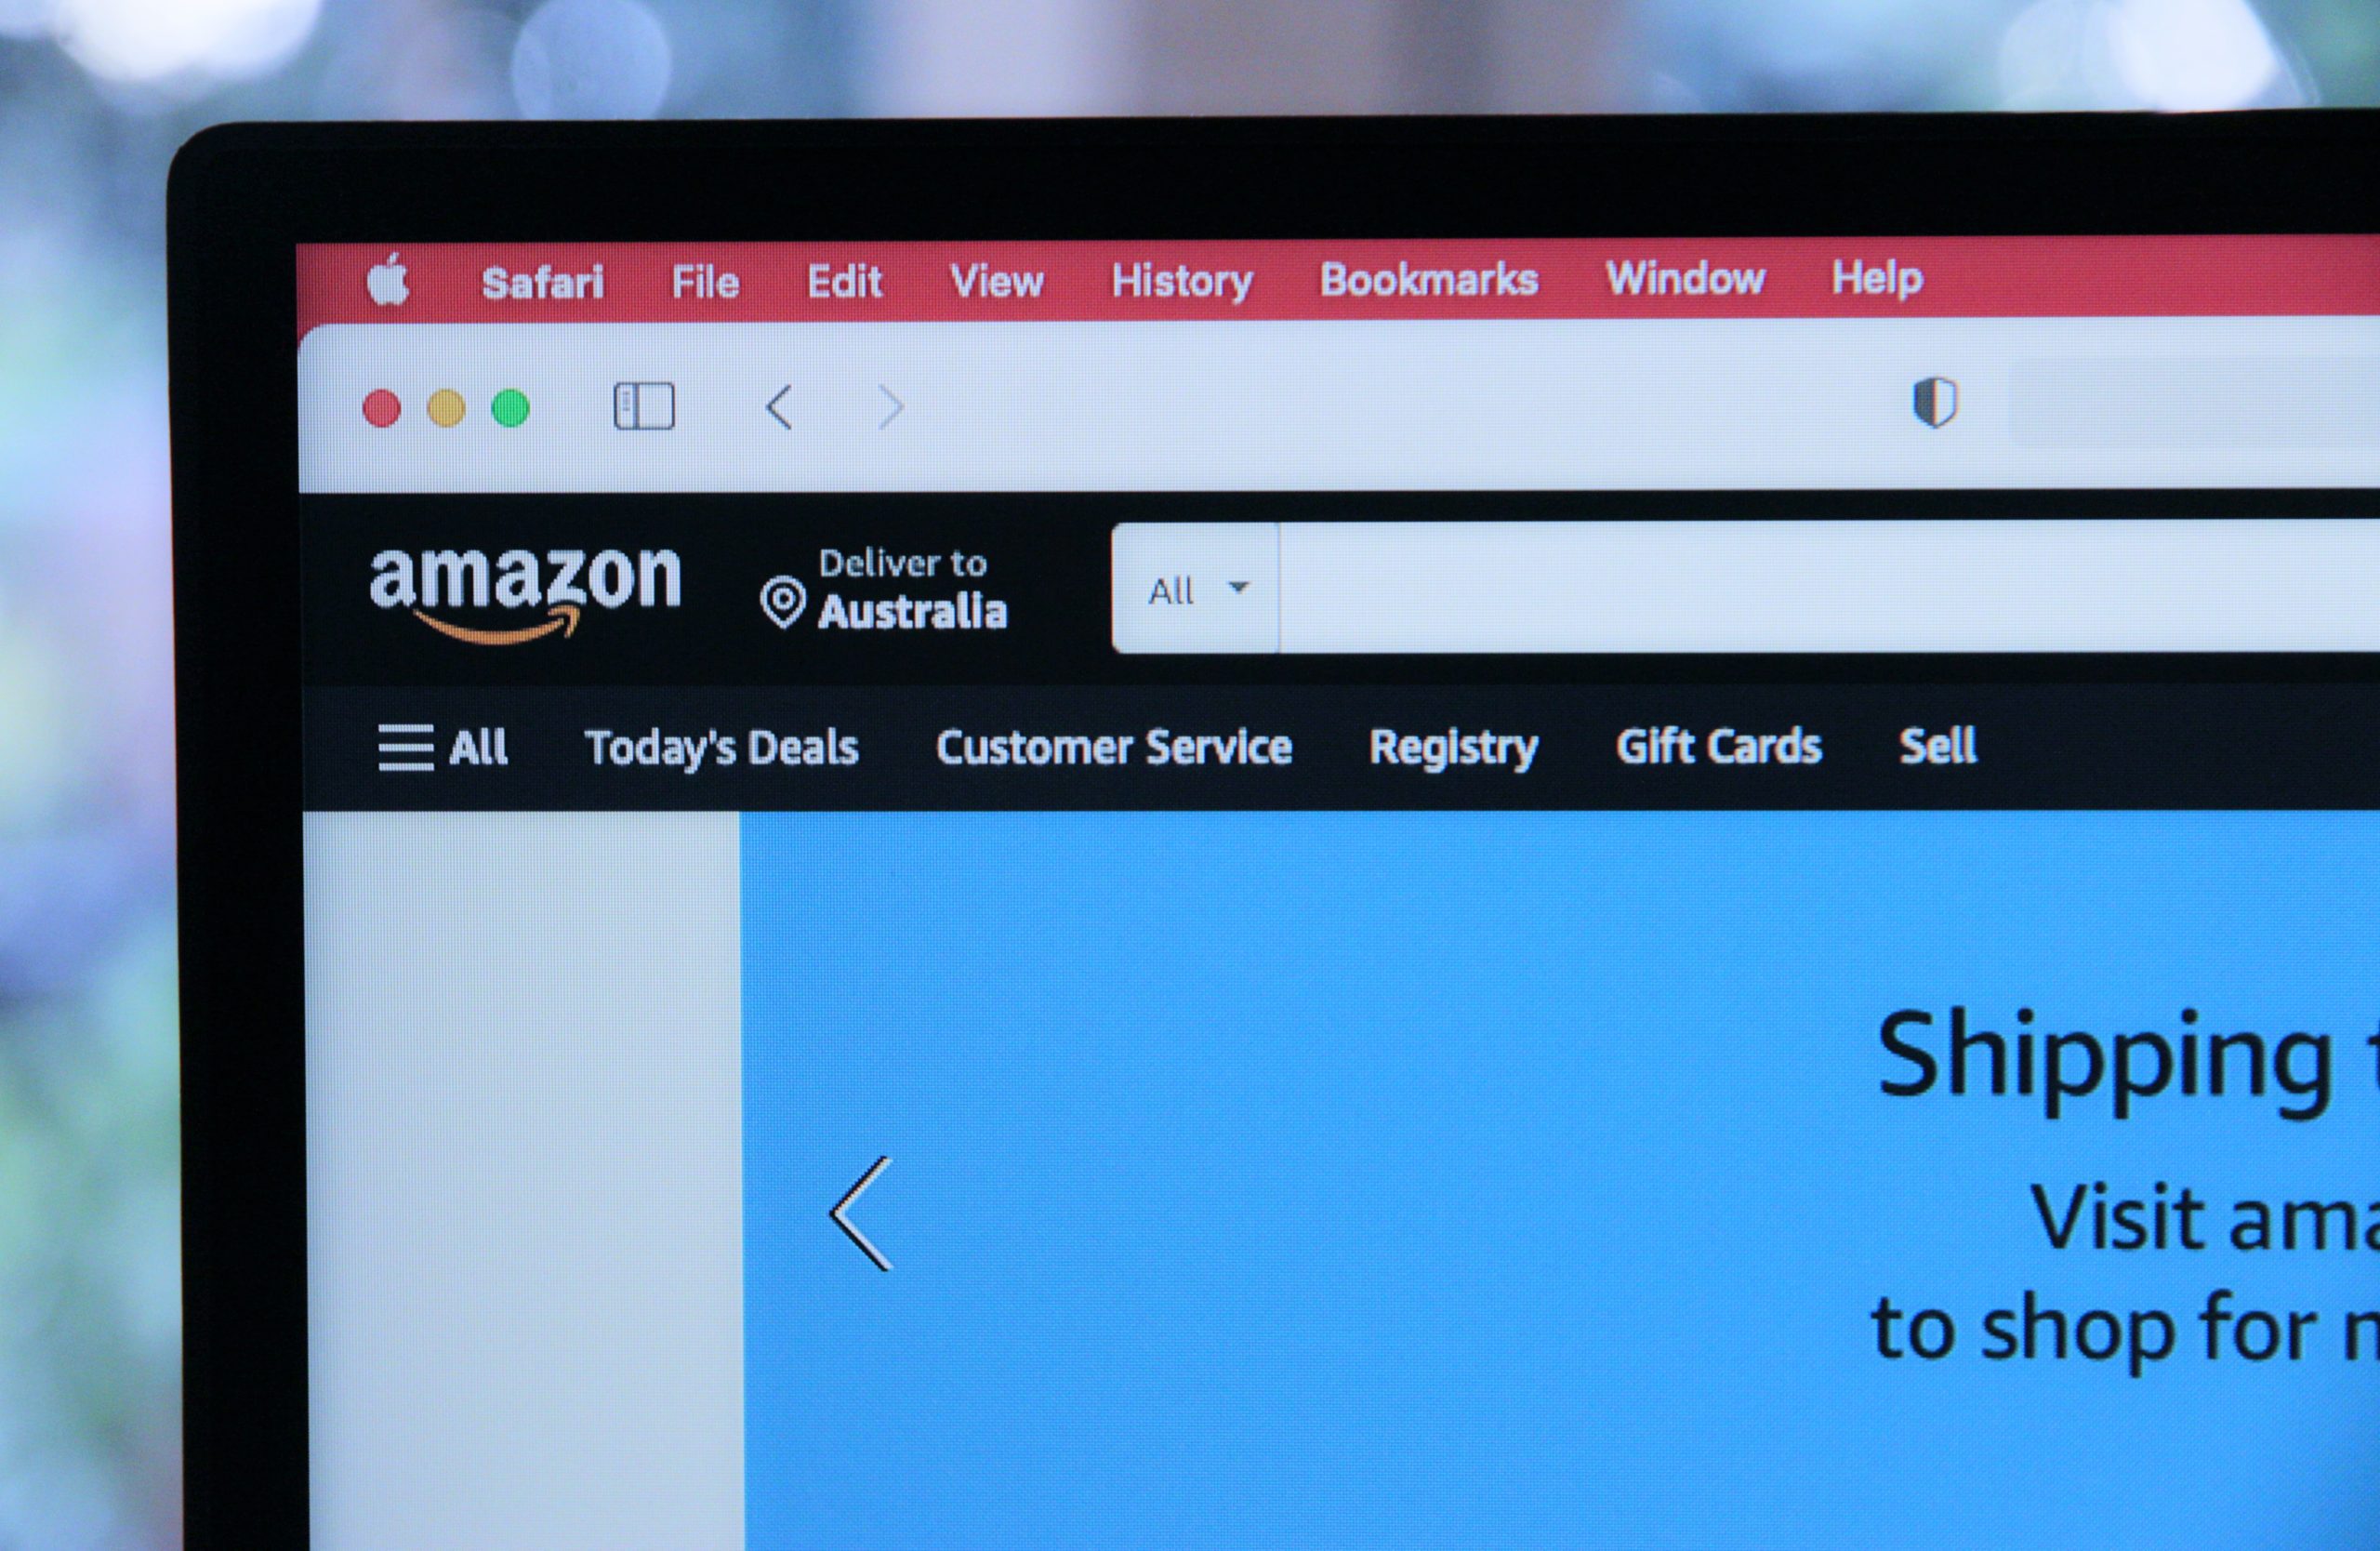 Build Your Brand Authority With an Amazon Brand Page